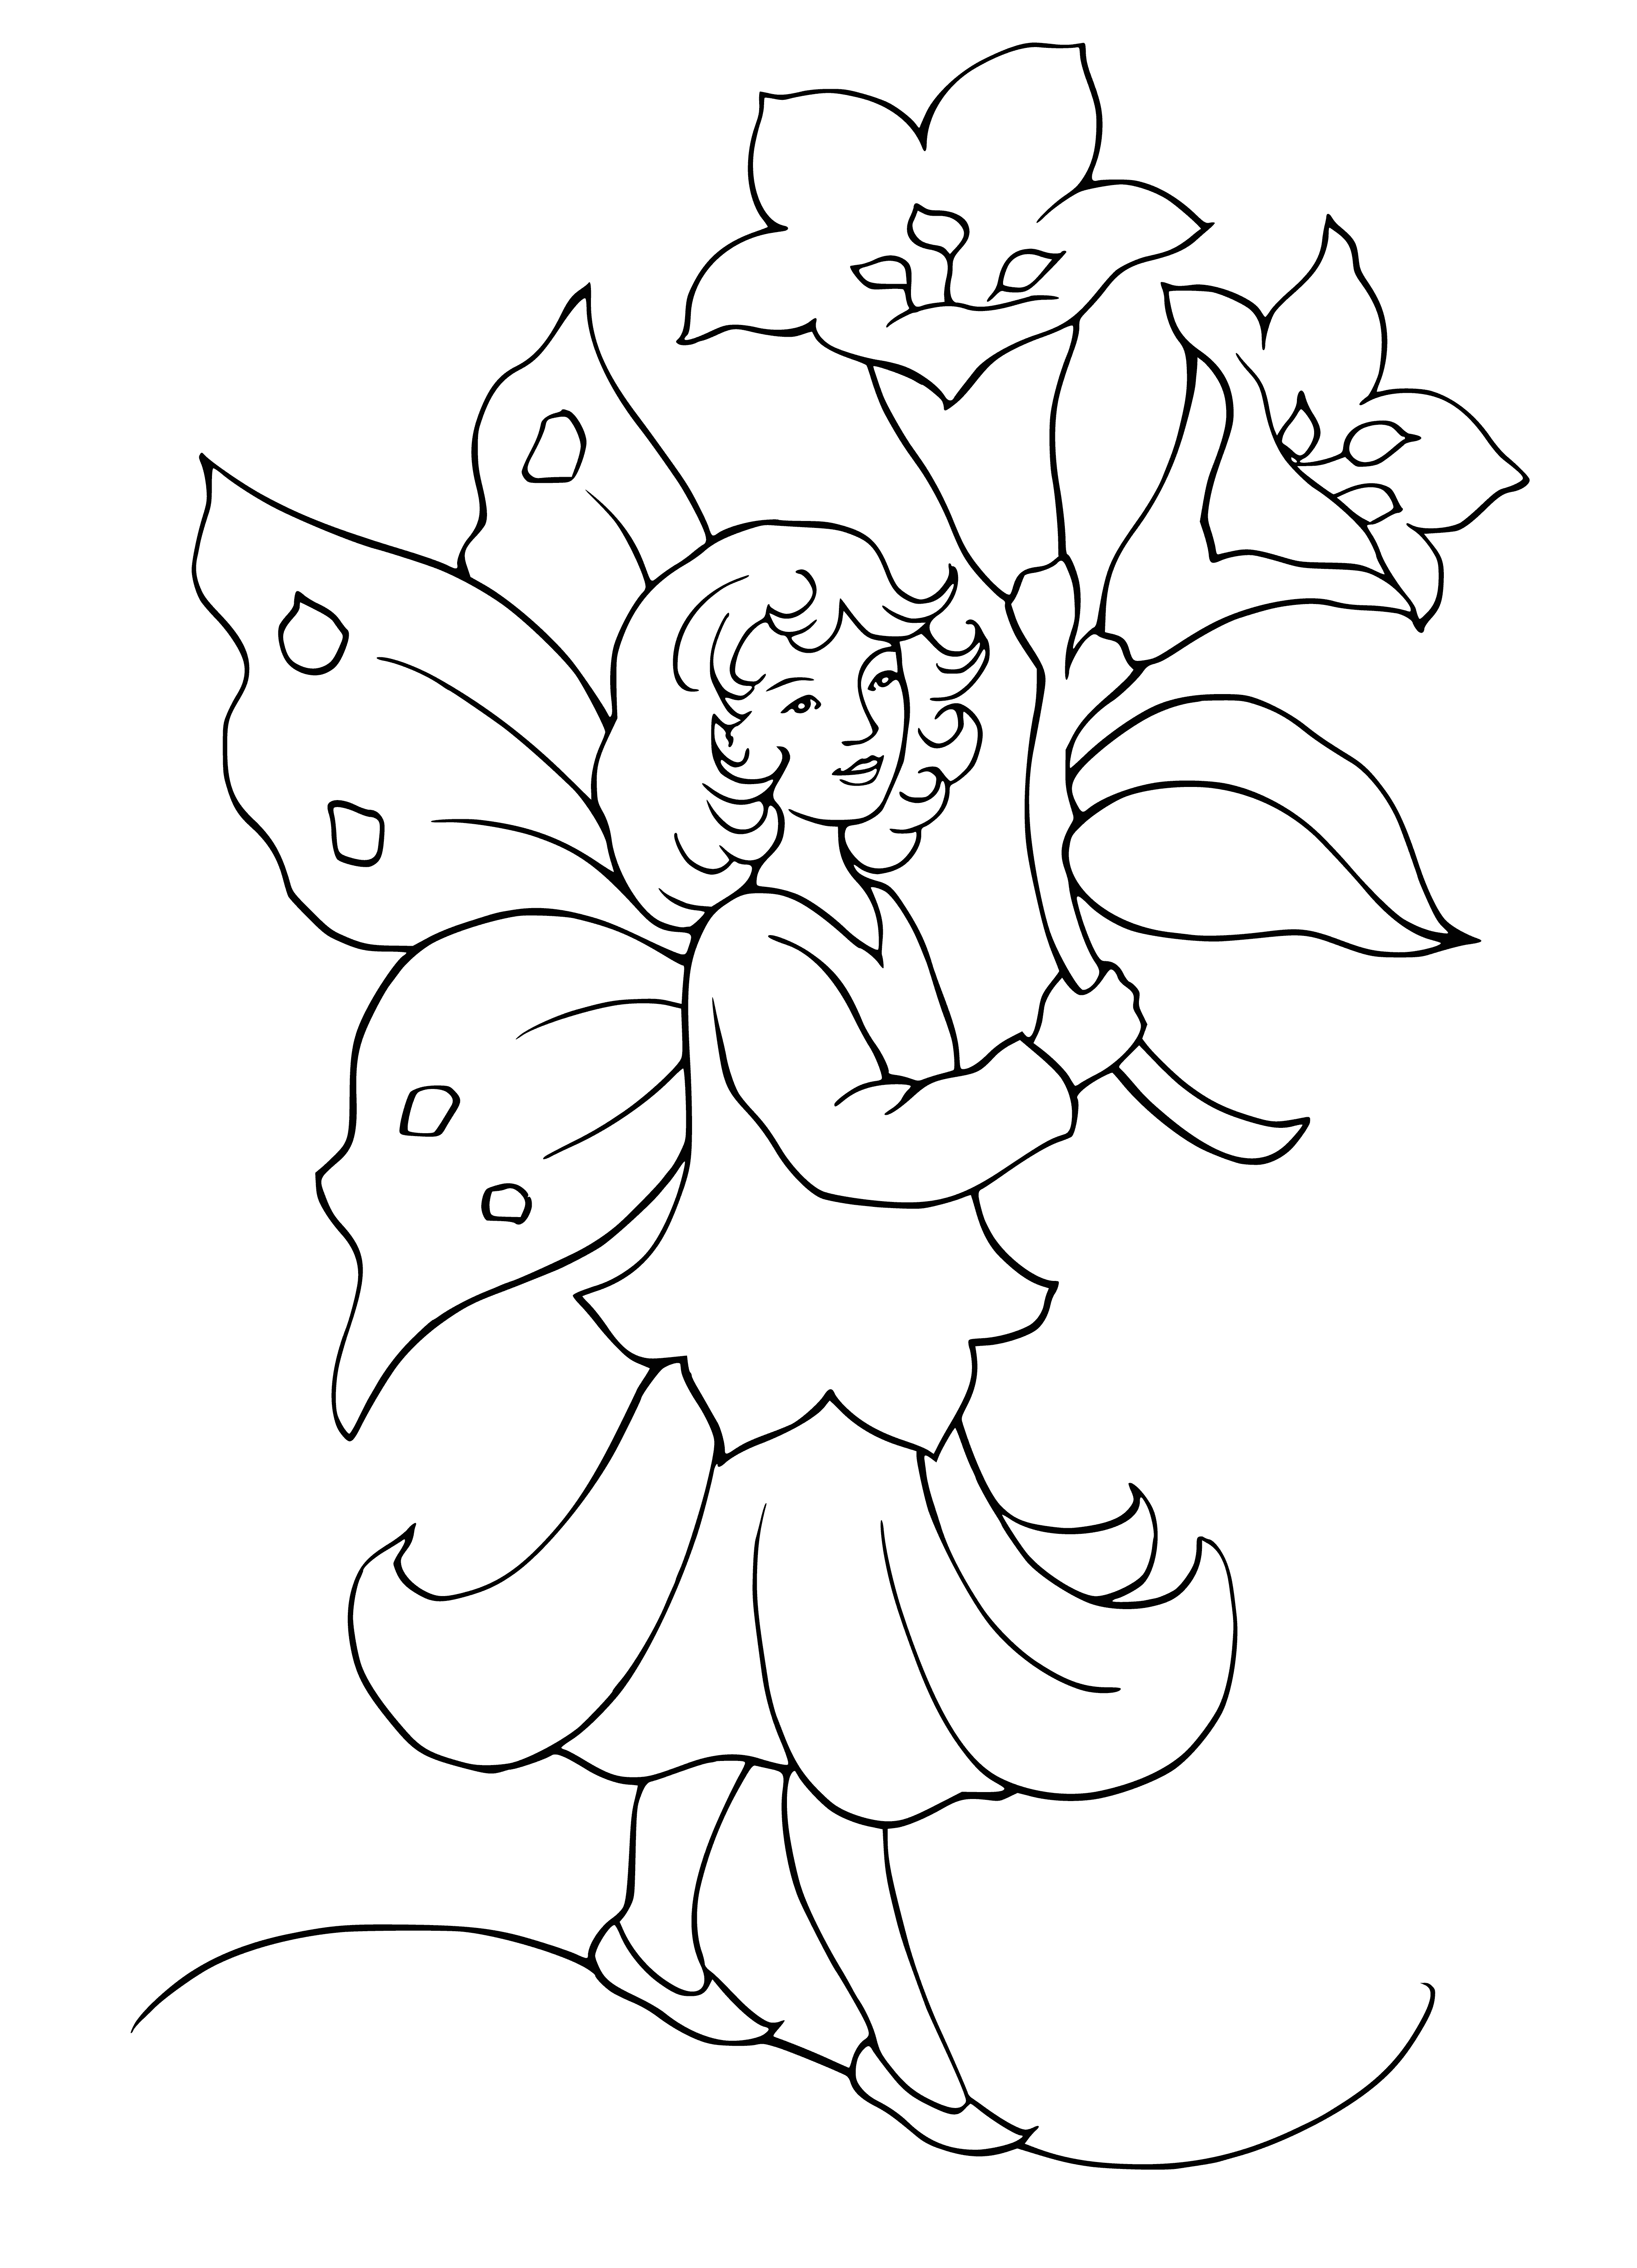 Fairy girl coloring page